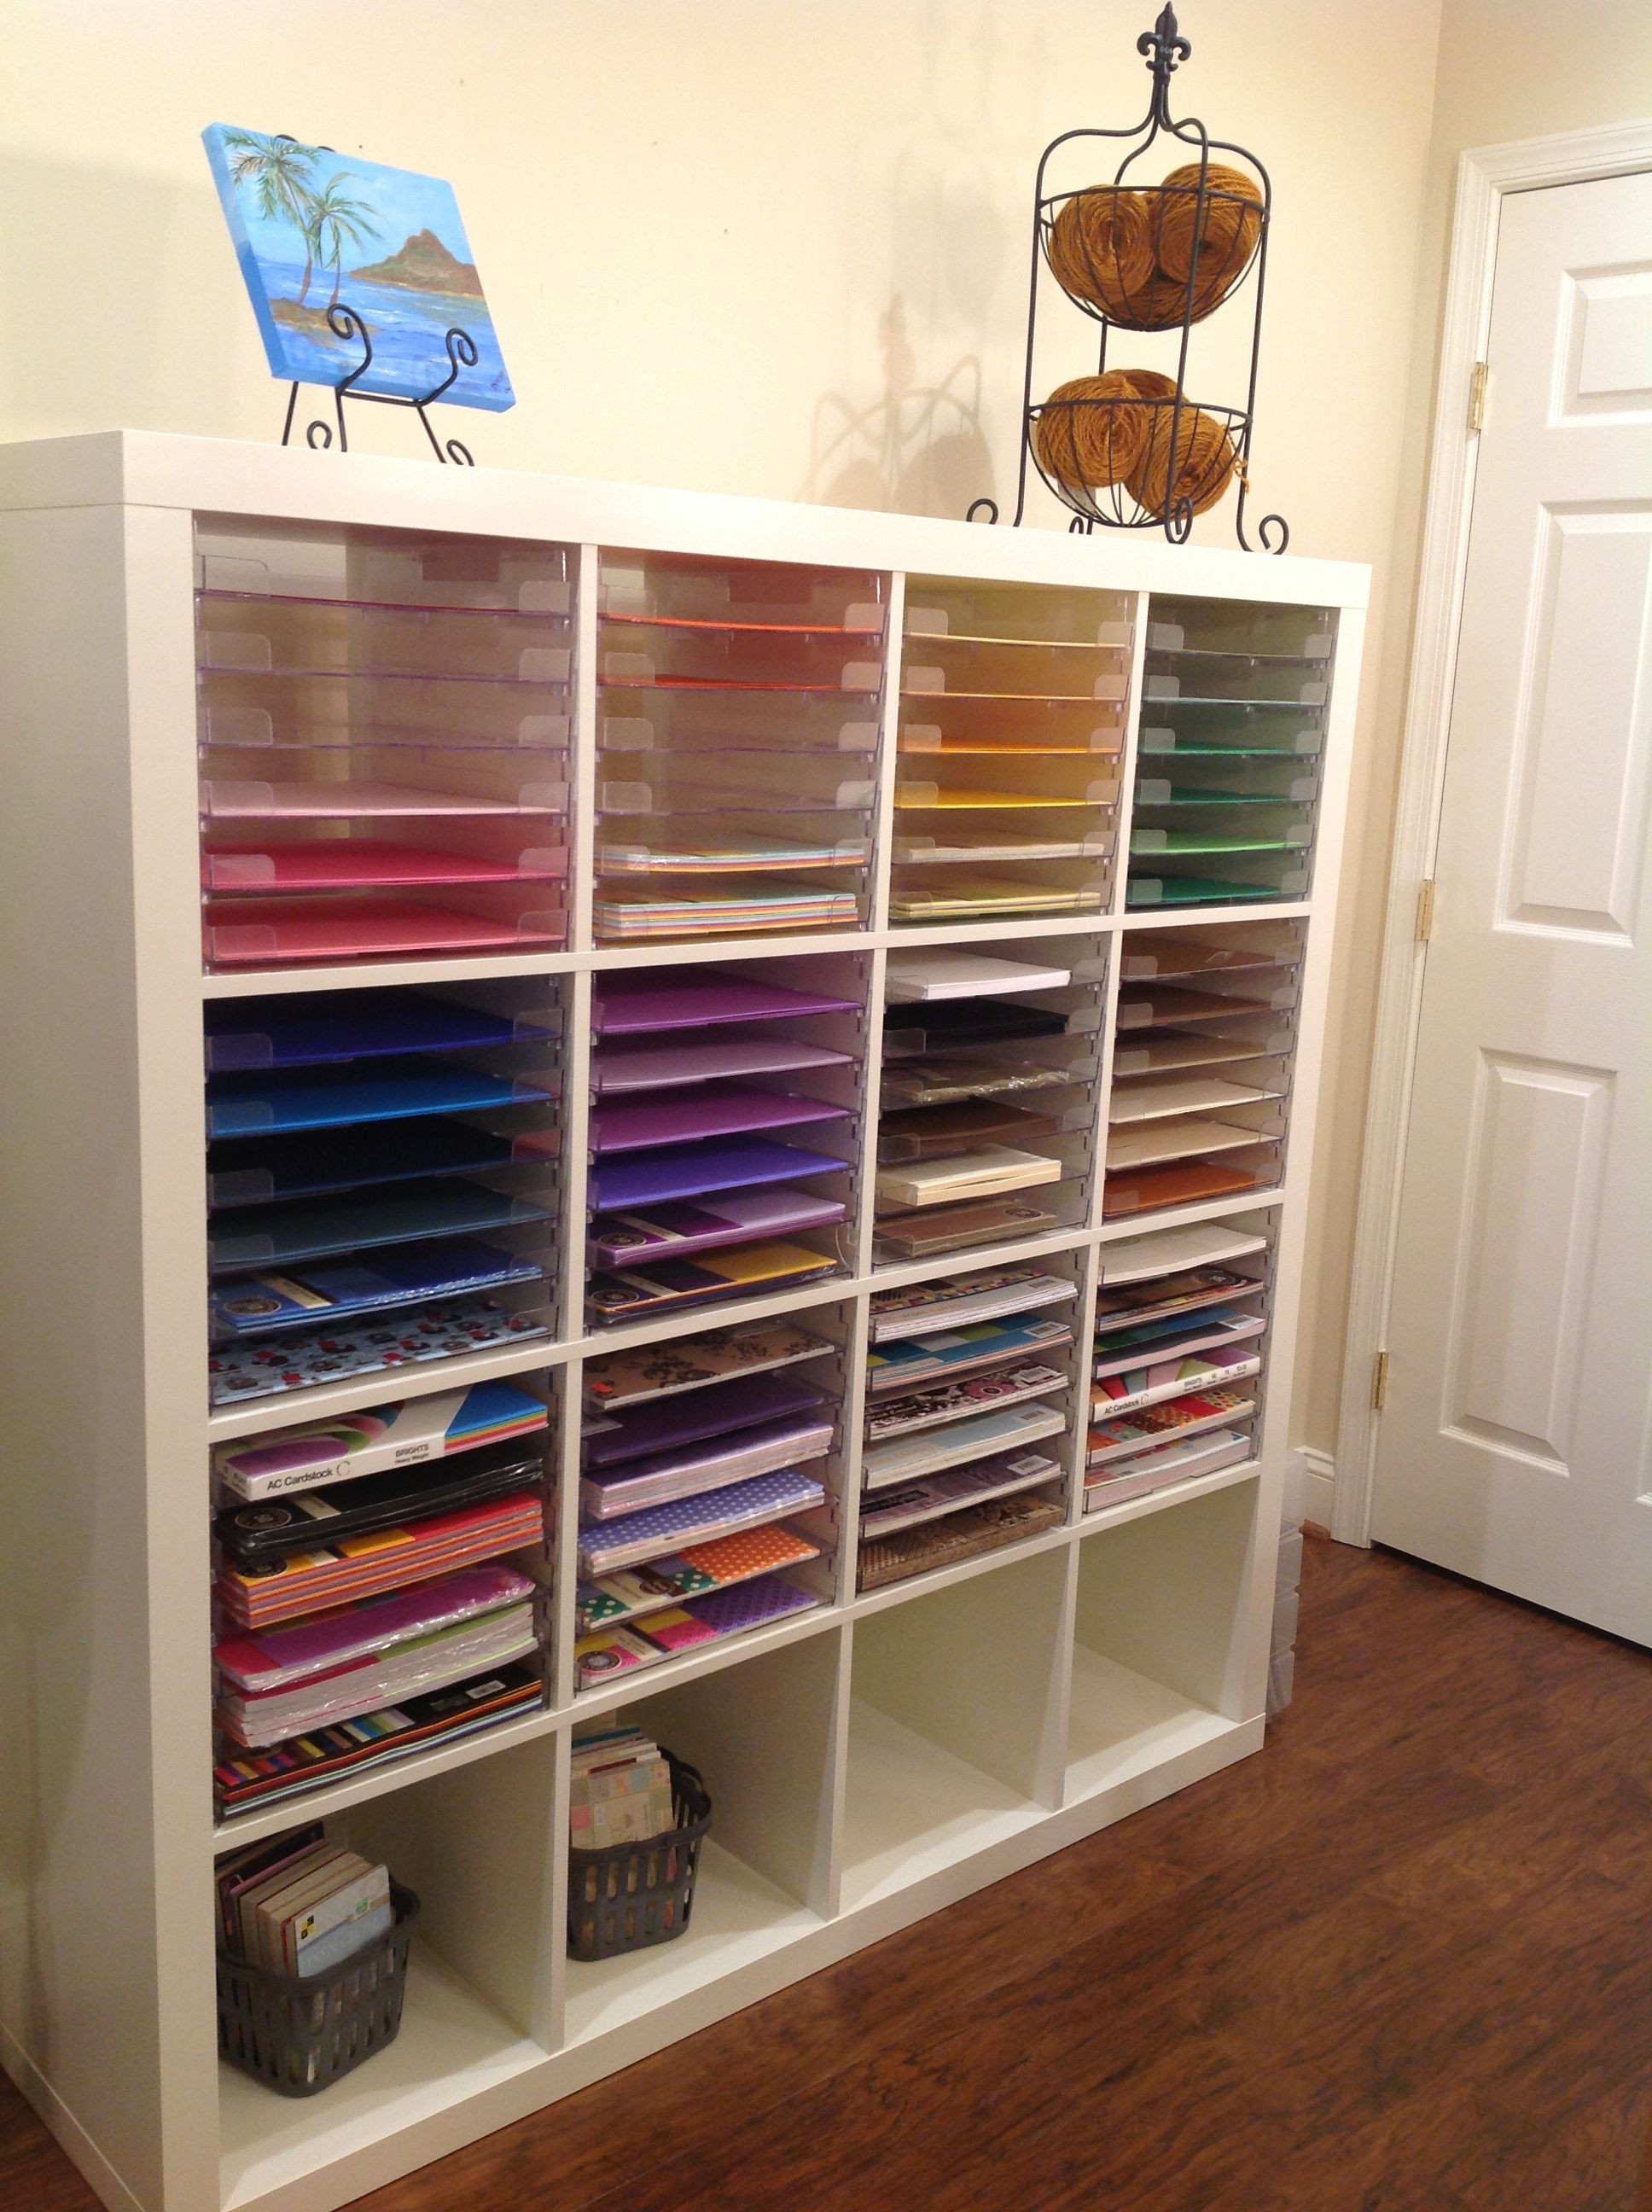 Ikea Paper Organizer
 Expedite from Ikea and display dynamics trays now sold at